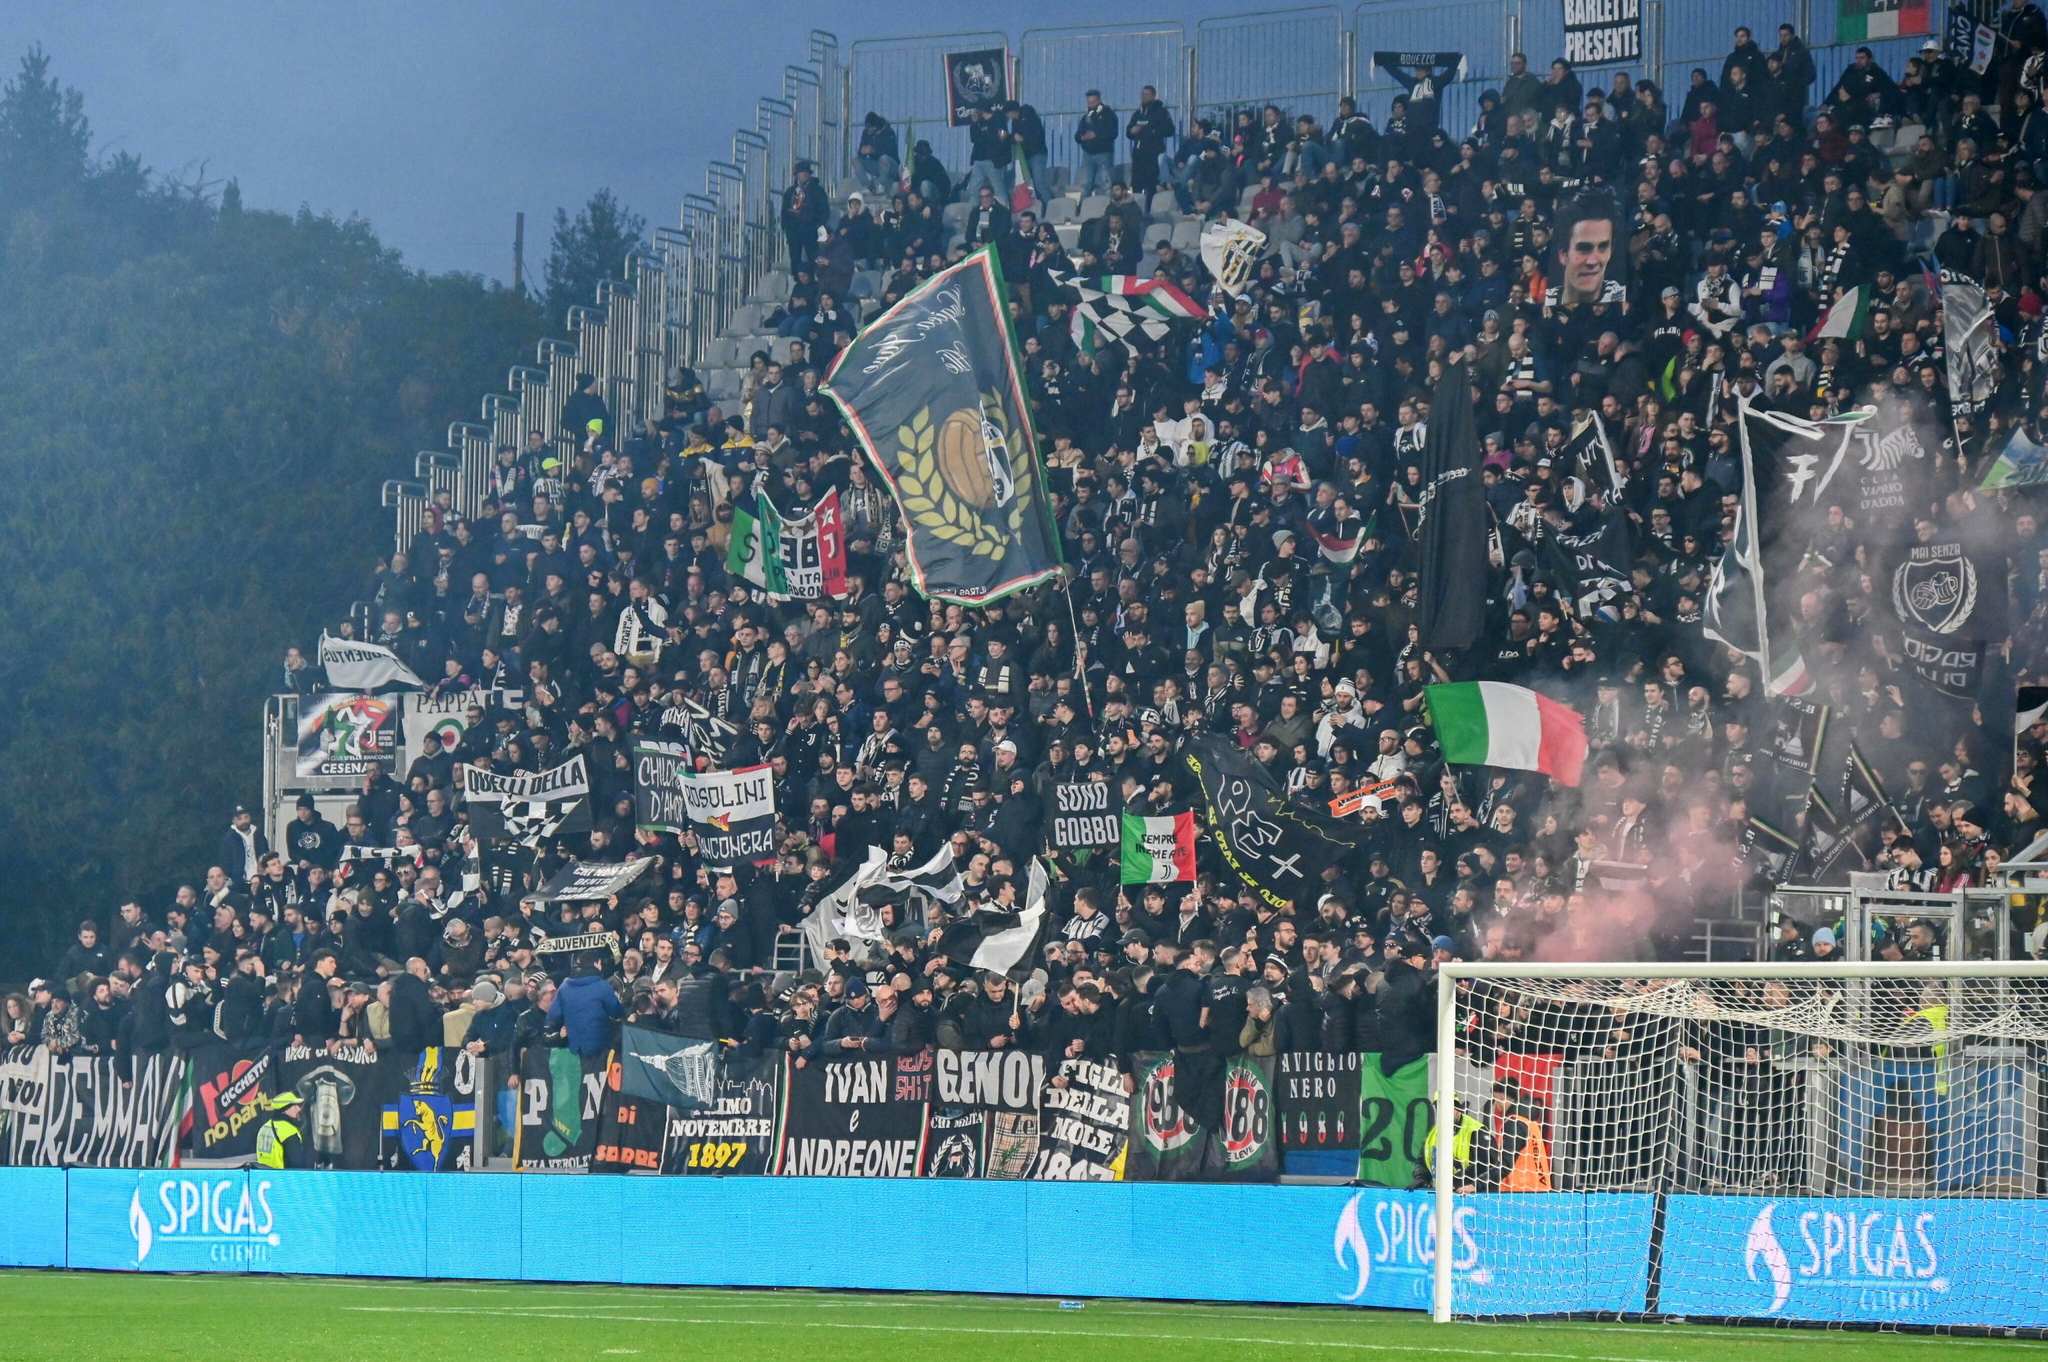 Accusation made that Juventus fans urinated on Spezia staff during Serie A clash